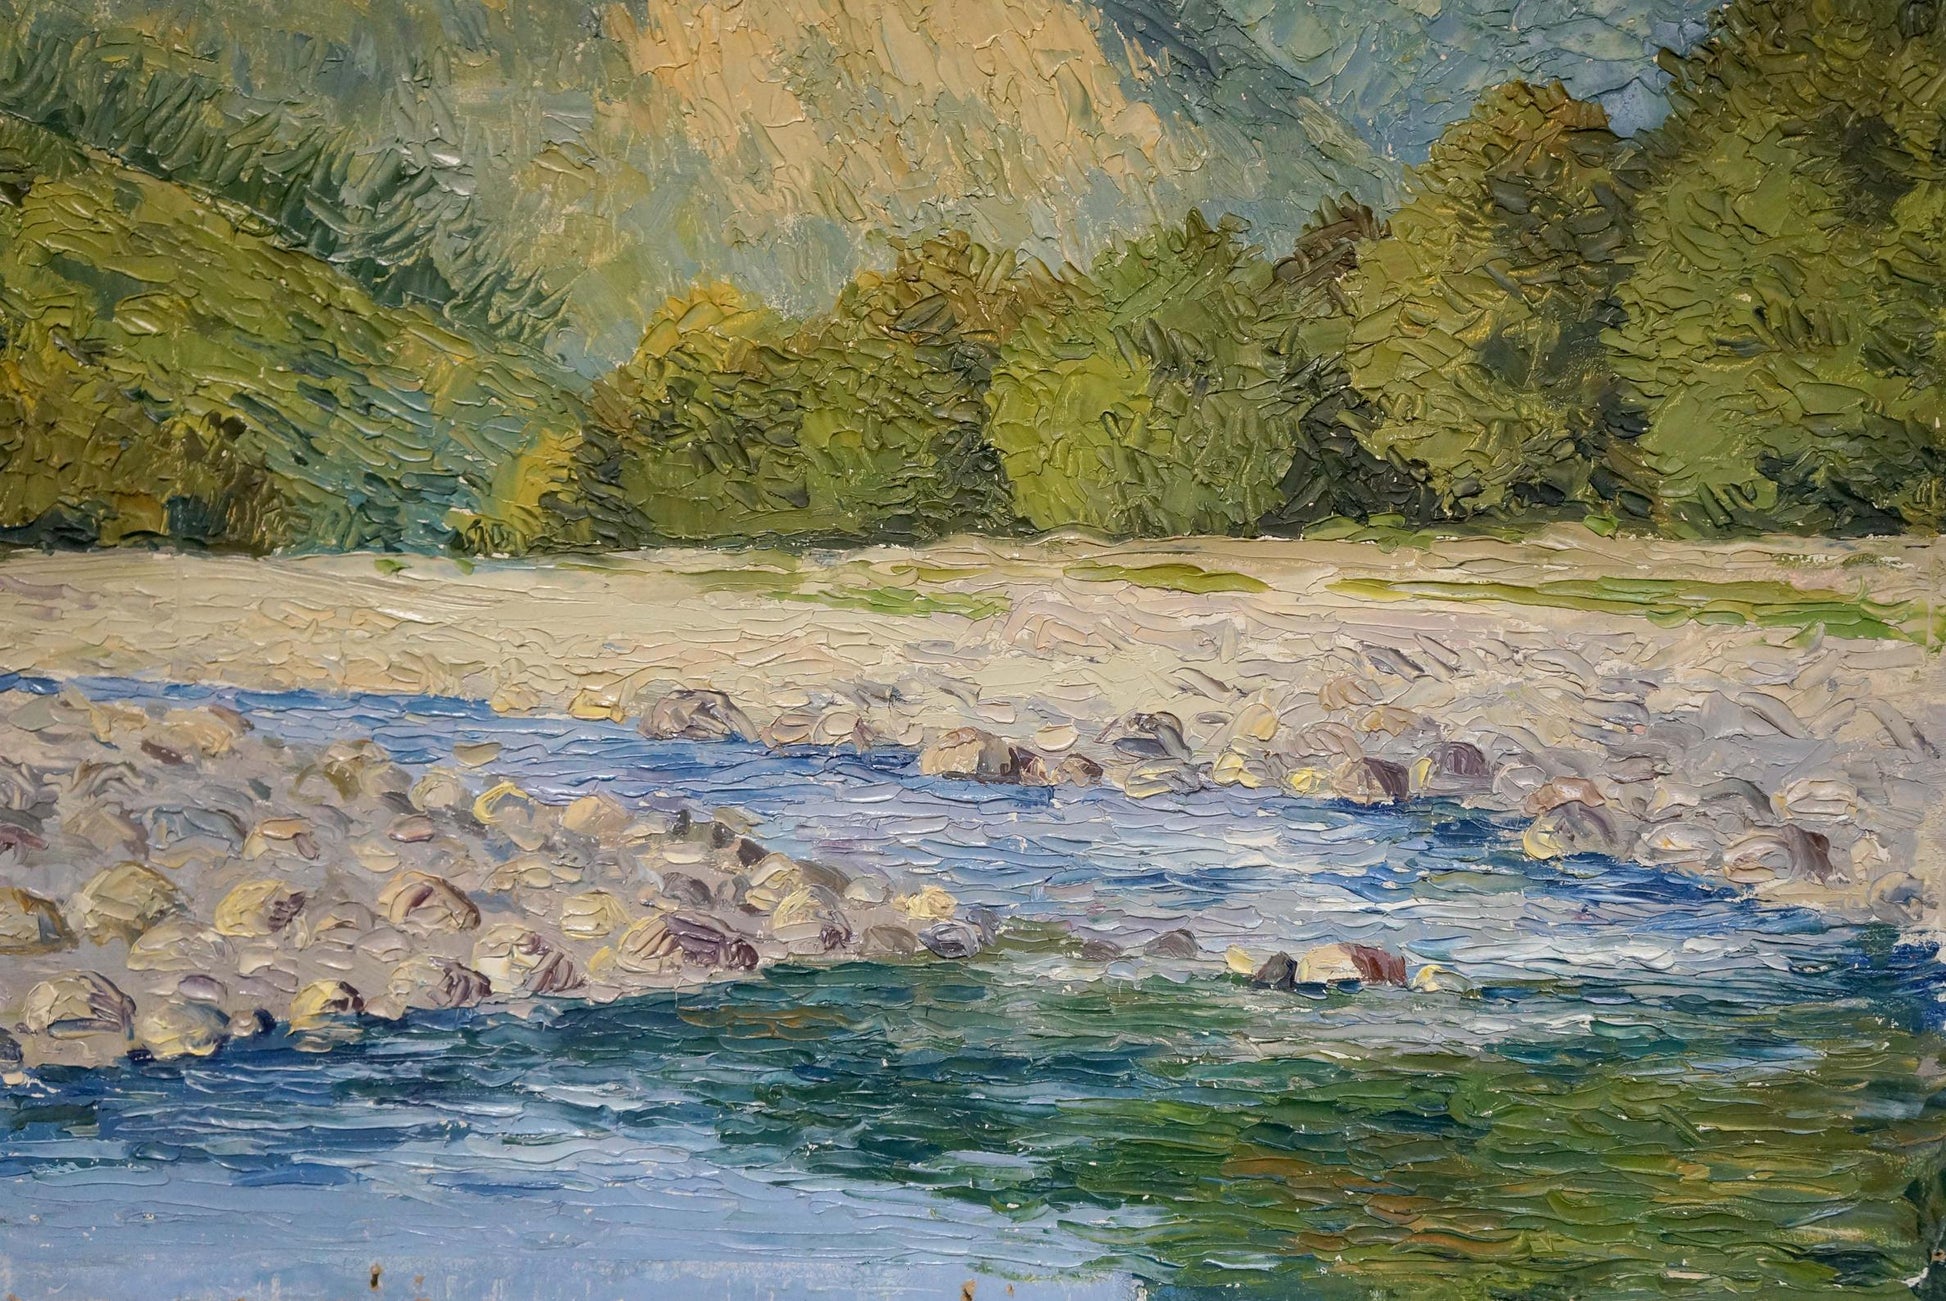 In the oil painting, a mountain creek is depicted by an anonymous artist